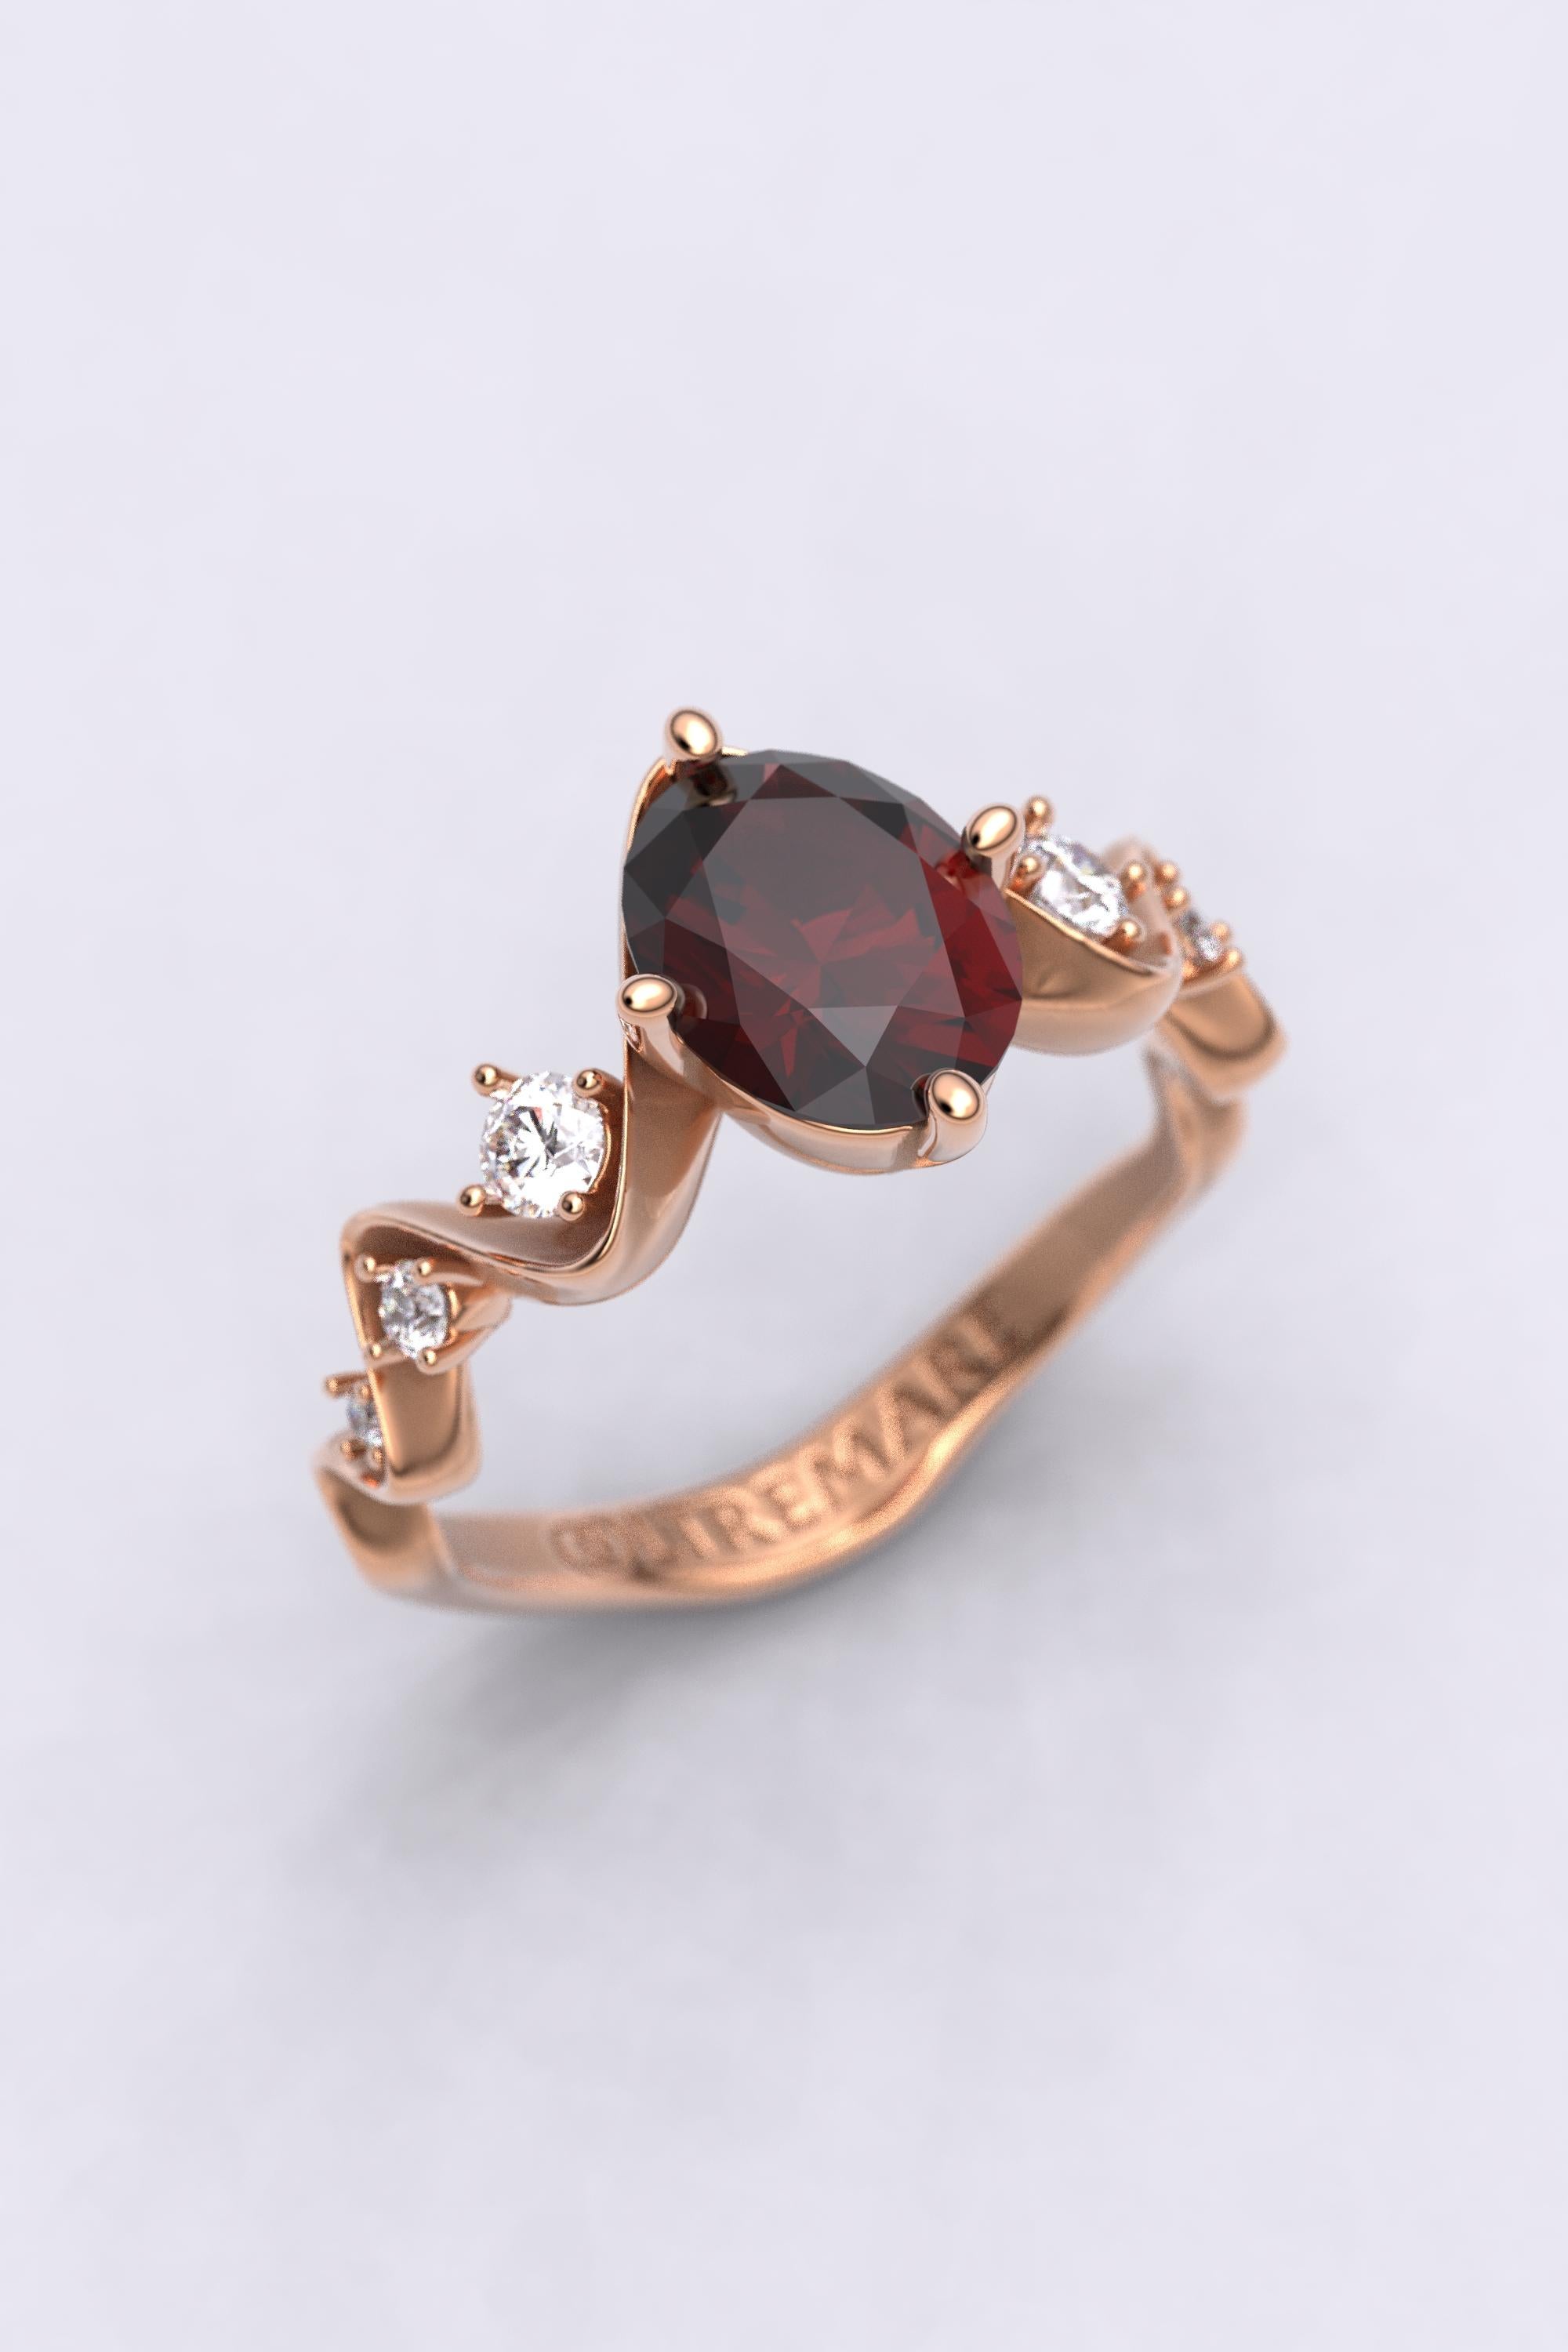 For Sale:  Natural Garnet and Diamonds Italian 14k Gold Engagement Ring, Oltremare Gioielli 3